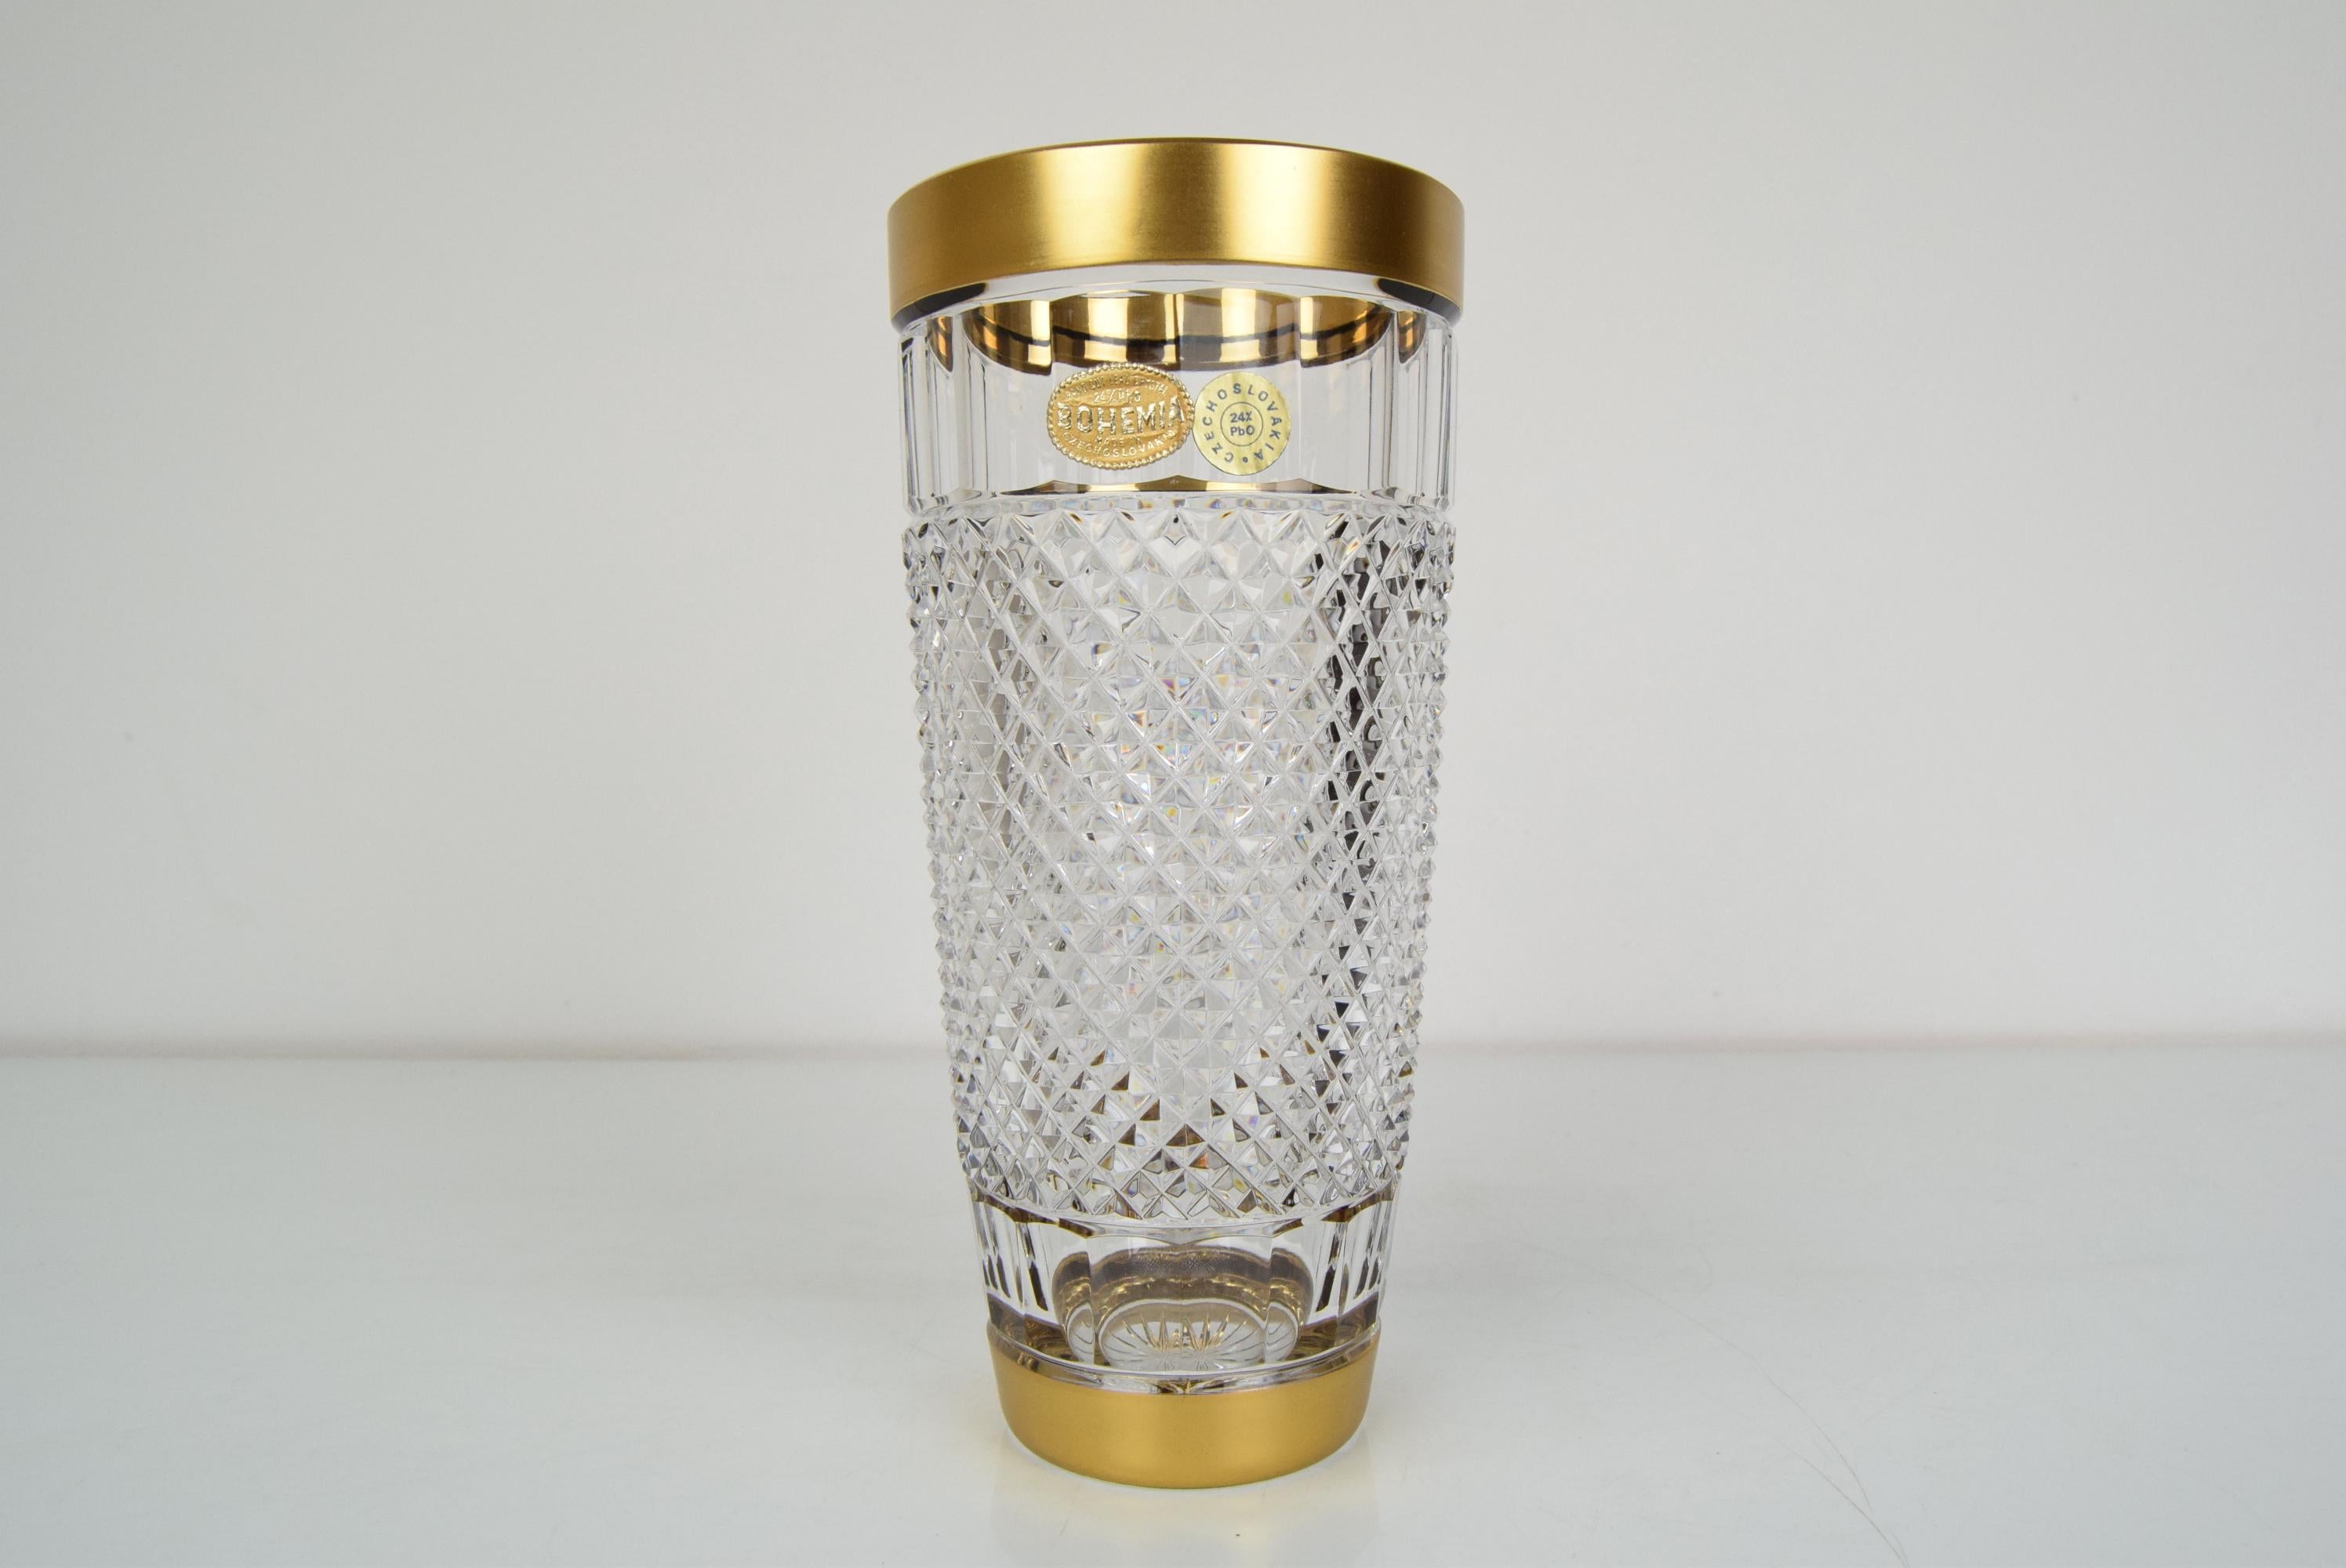 Made in Czechoslovakia.
Made of lead crystal, cut glass.
Hand cut.
Good Original condition.